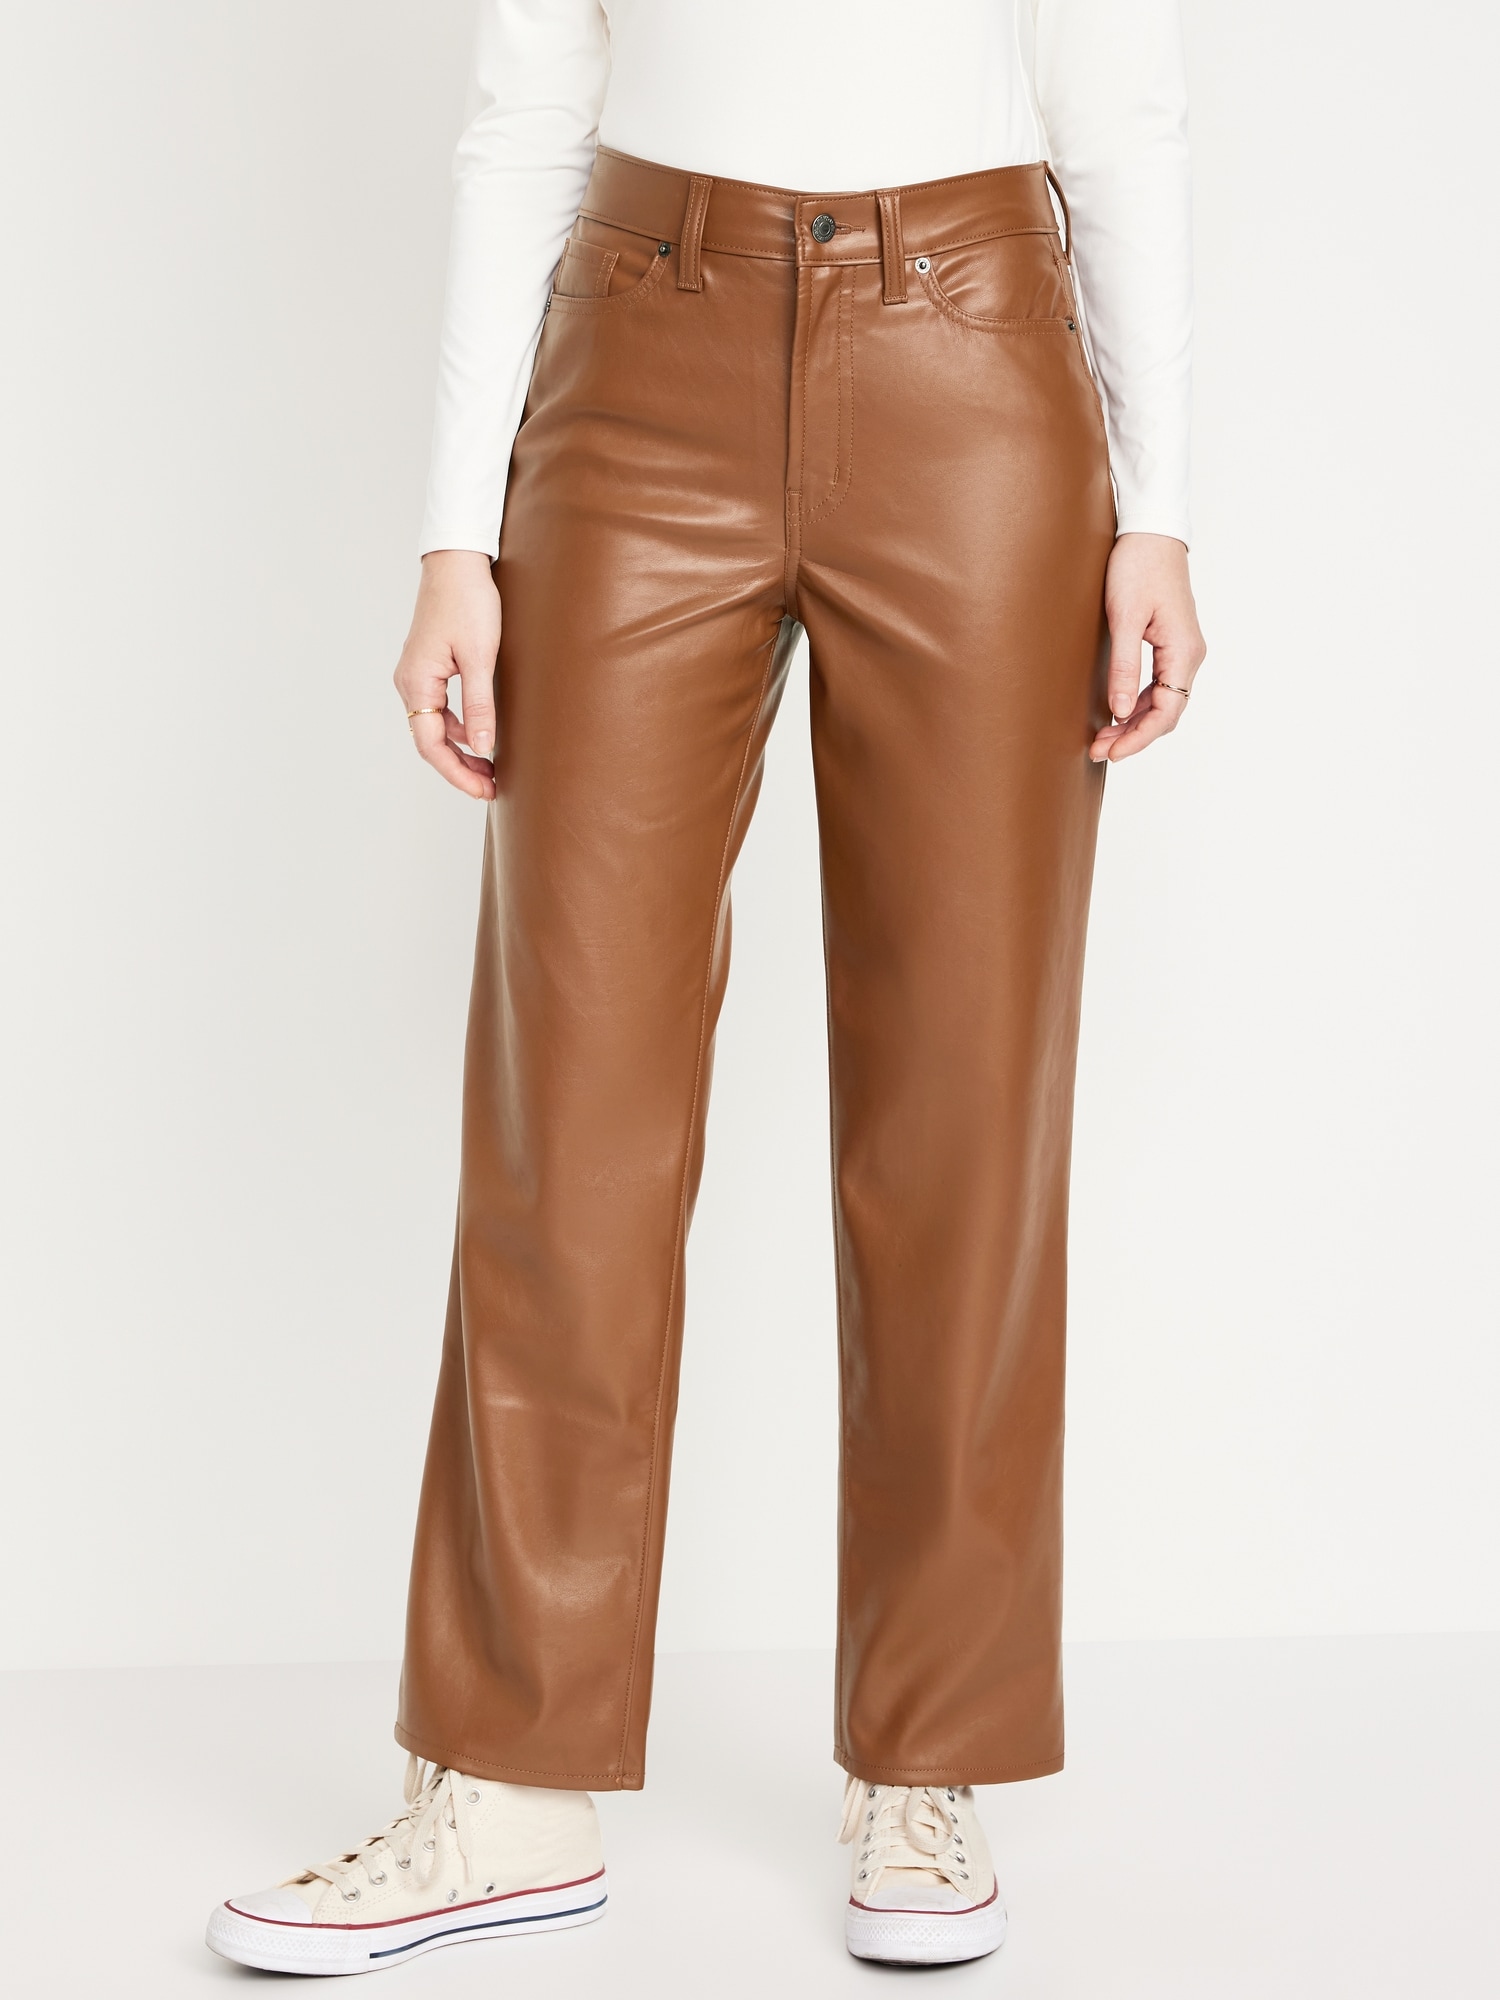 Higher High-Waisted Faux-Leather Flare Pants